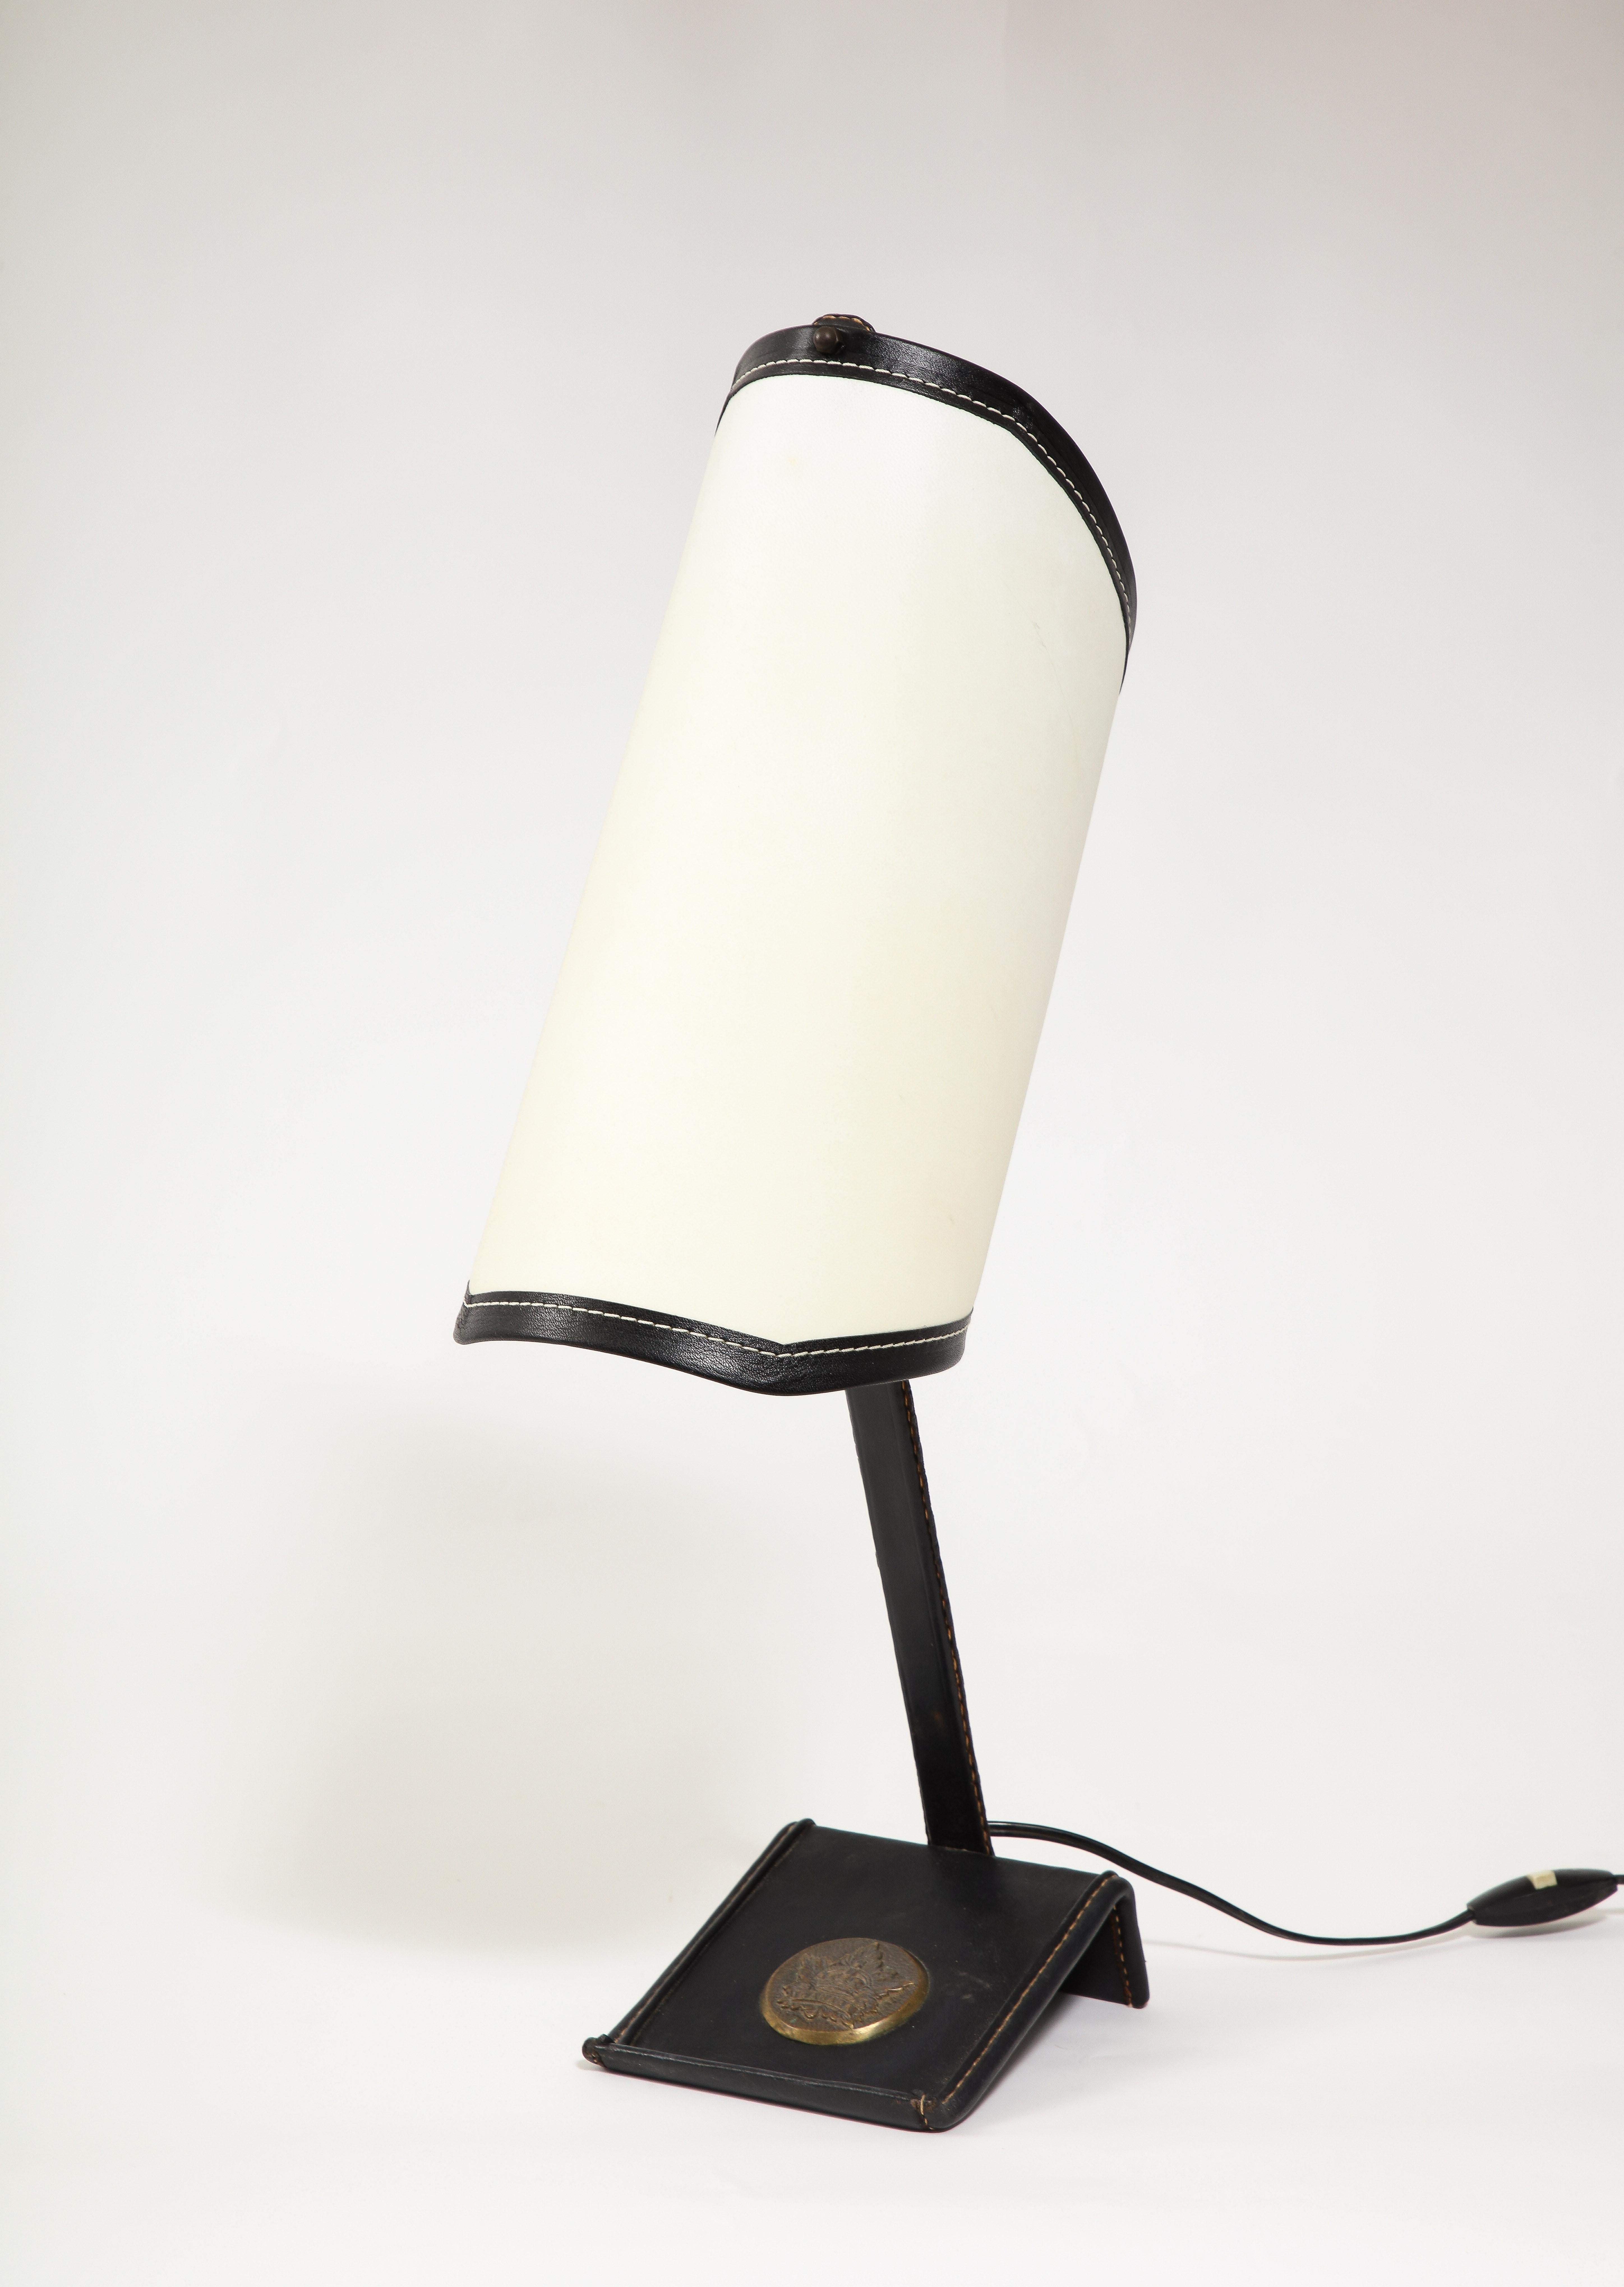 Jacques Adnet Curved Desk Lamp With Black Leather Trim, France 1950's For Sale 2